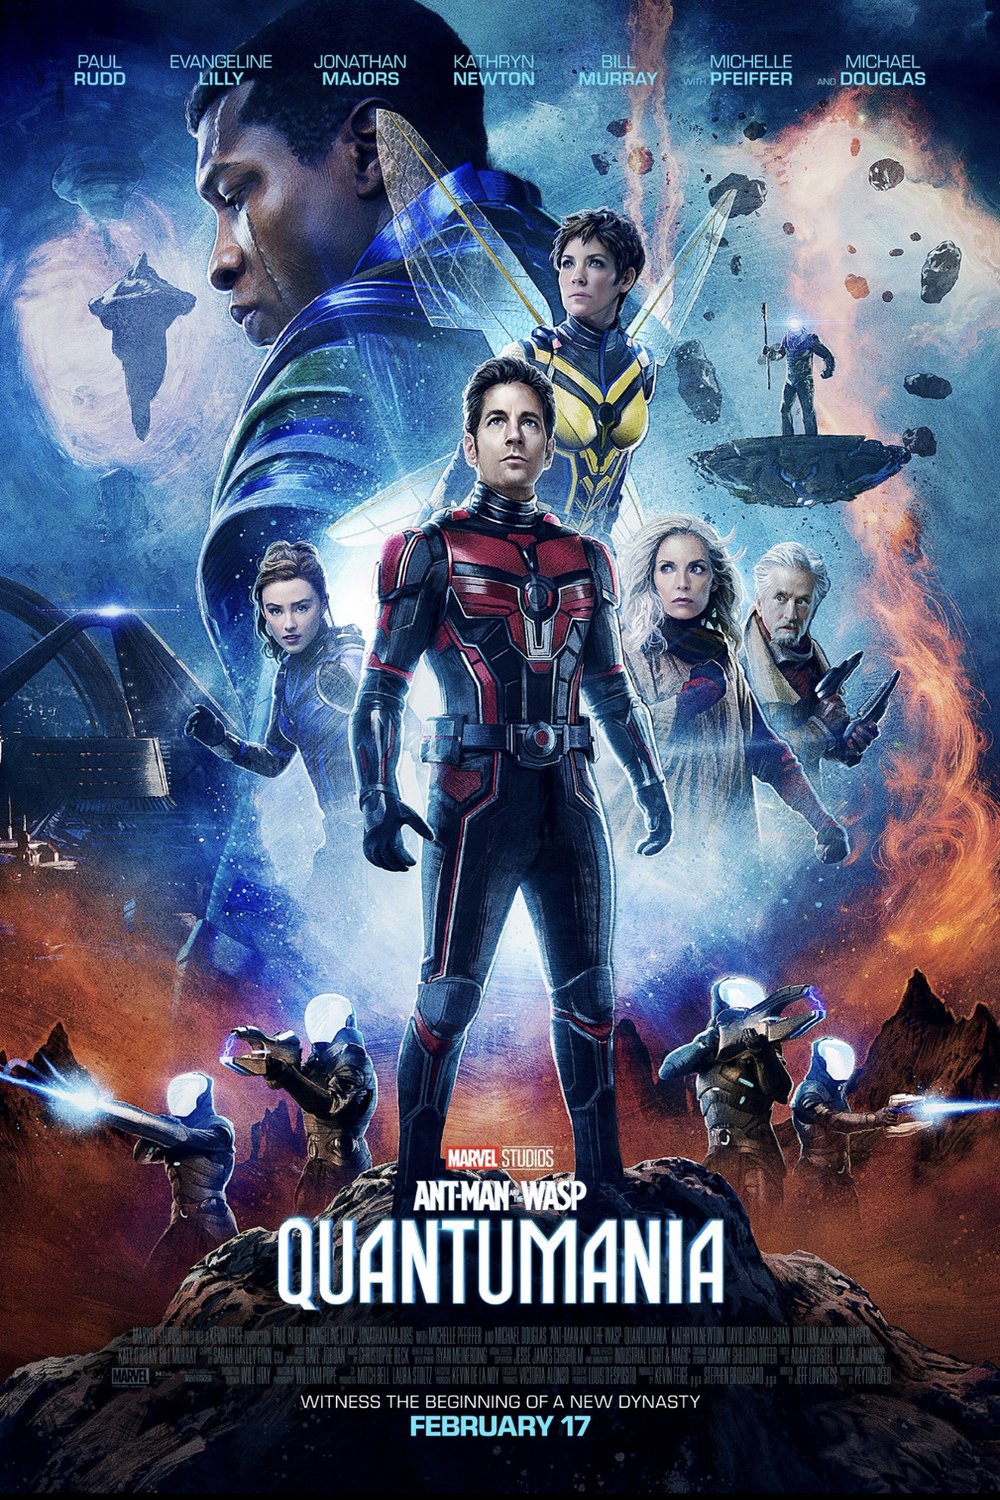 L'affiche du film Ant-Man and the Wasp: Quantumania